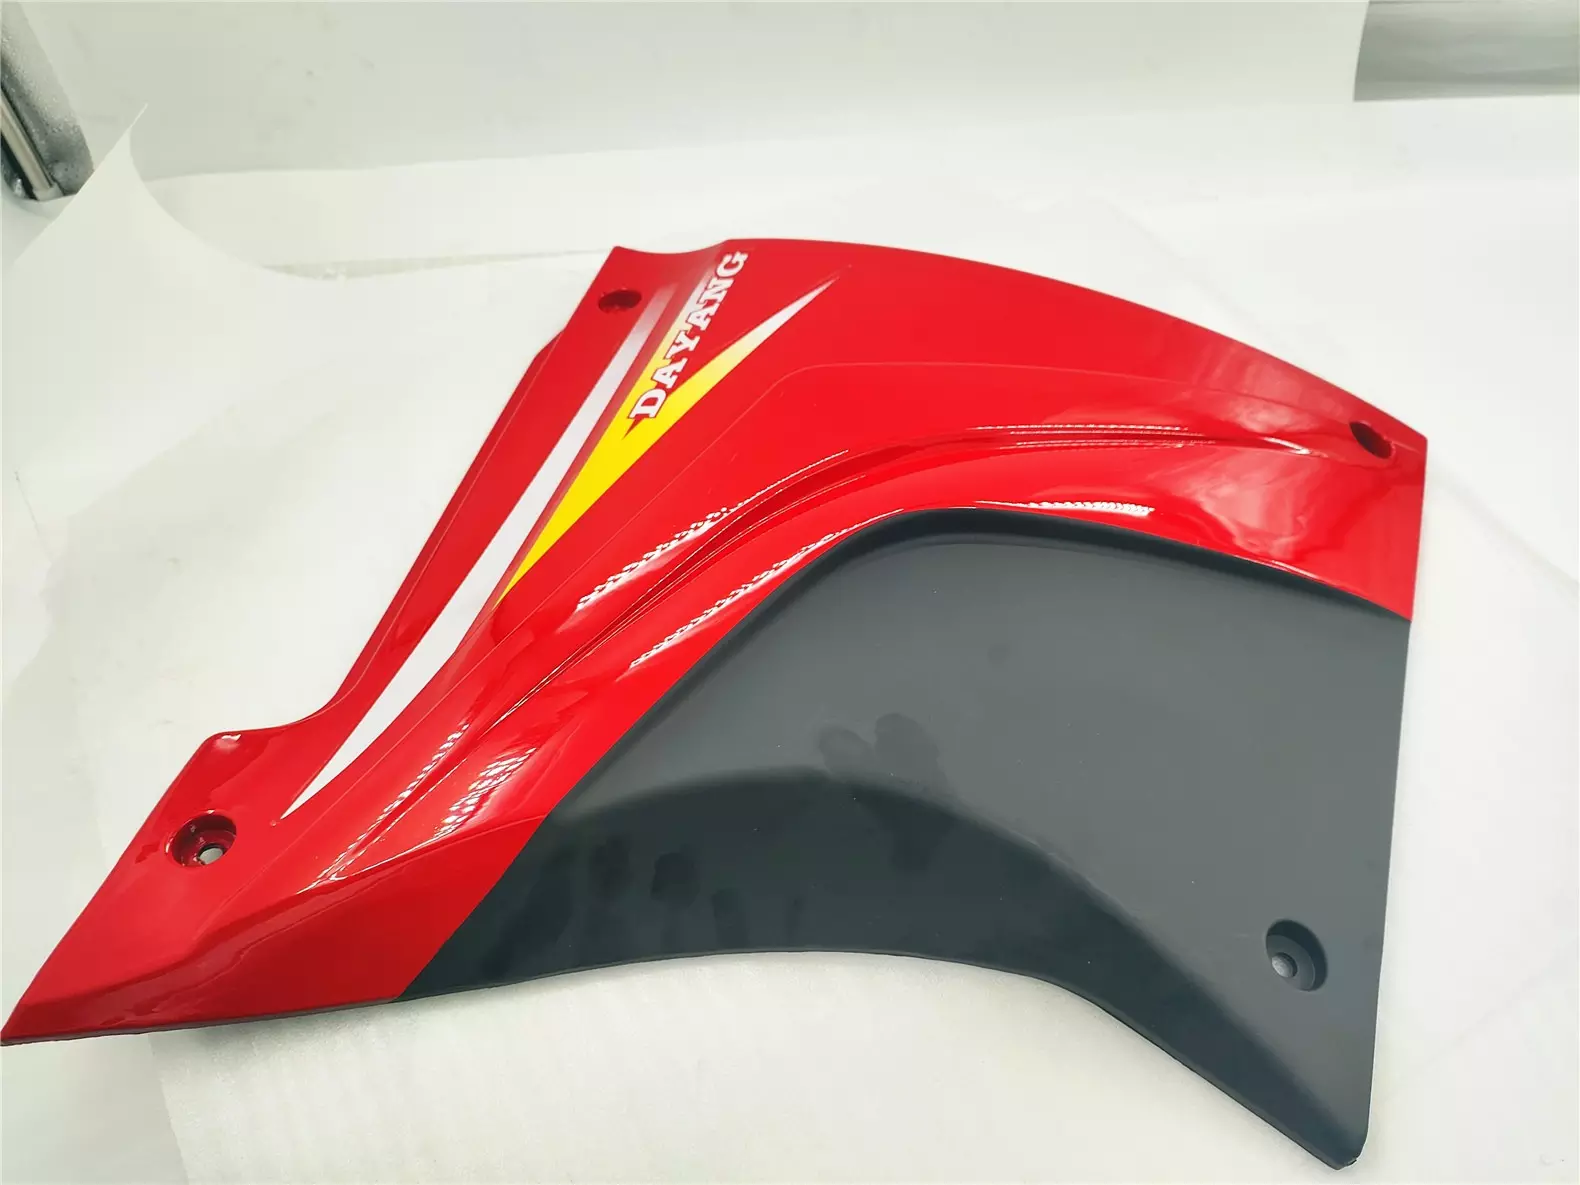 Hot sale BeiYi DAYANG three wheel motorcycle tricycle scooter no.2 oil fuel tank side cover for the global market